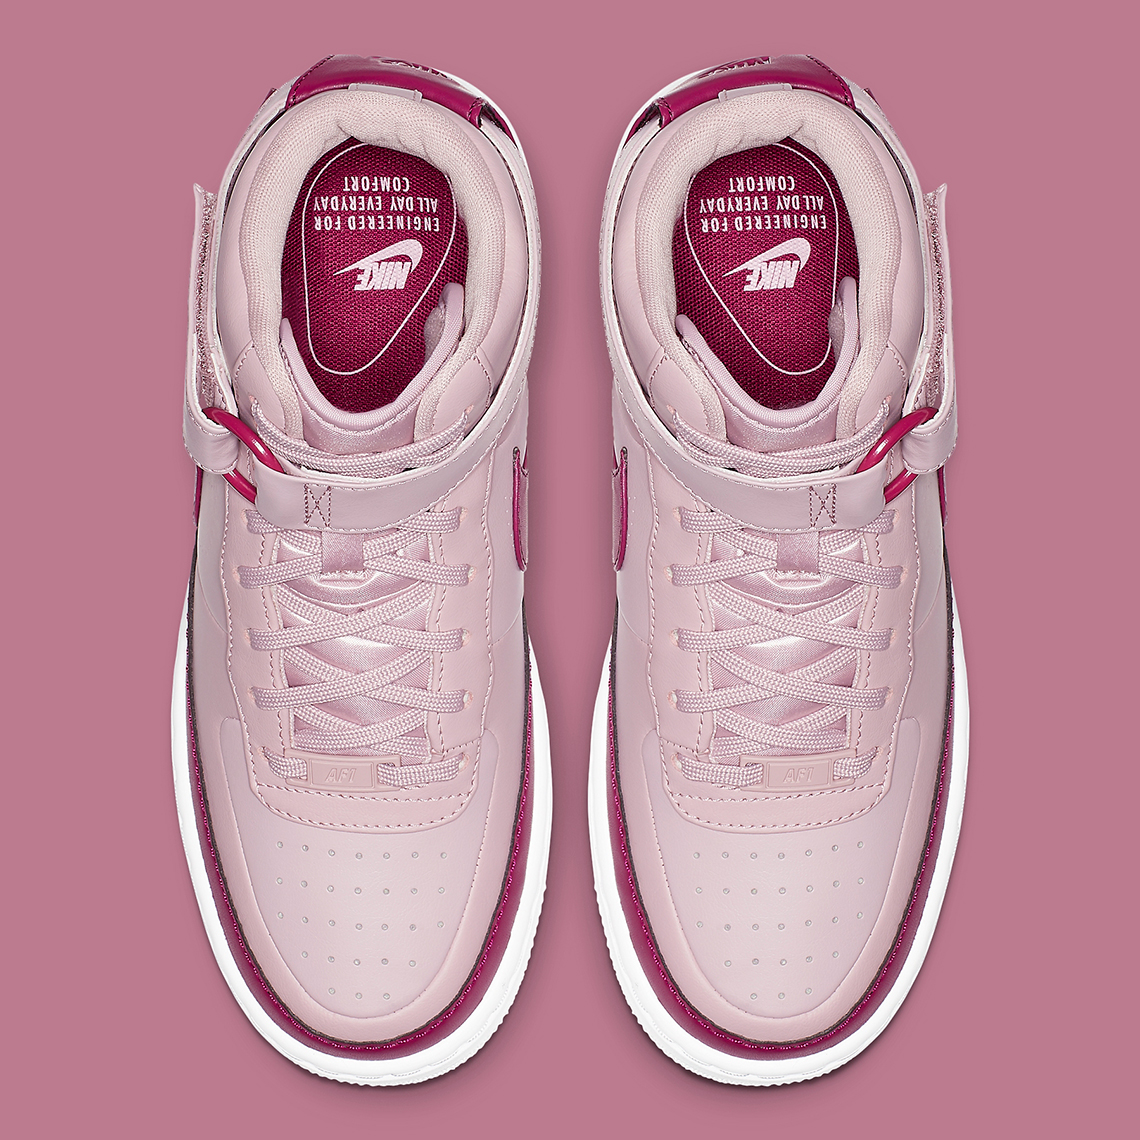 nike air force 1 jester pink